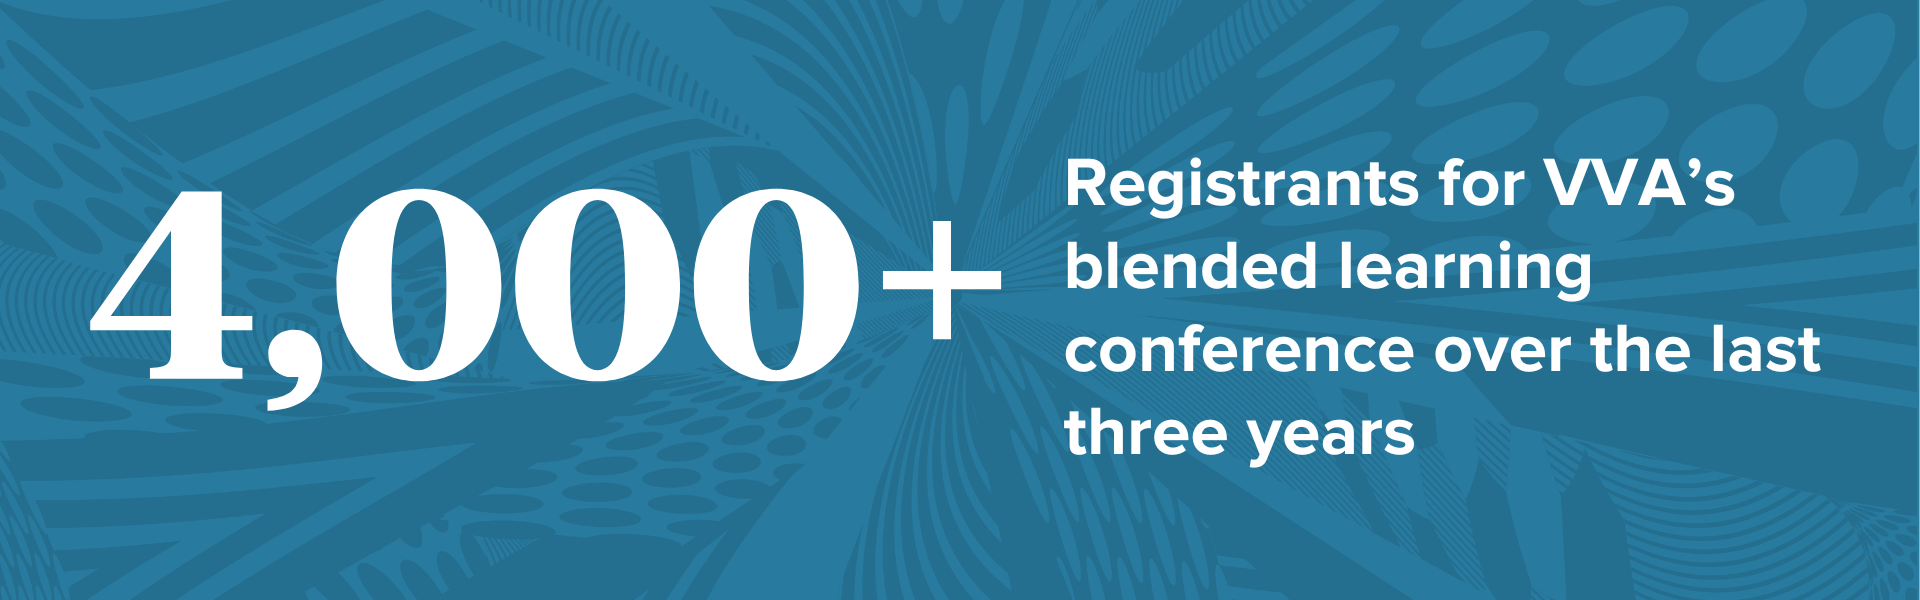 background: blue splashy text: 4,000+ registrants for VVA's blended learning conference over the last three years